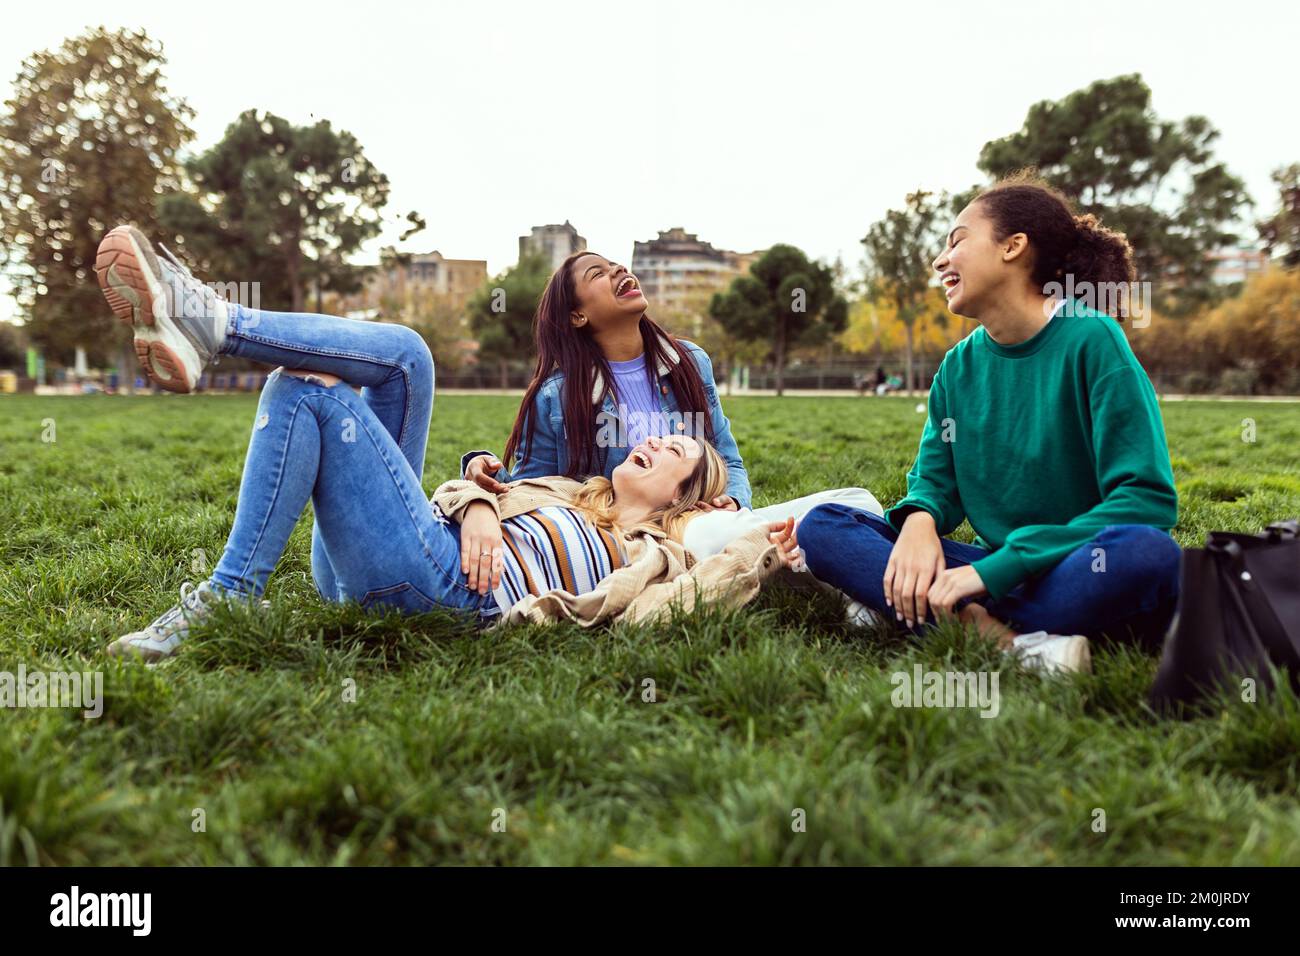 Three happy young women having fun sitting on green grass at park Stock Photo